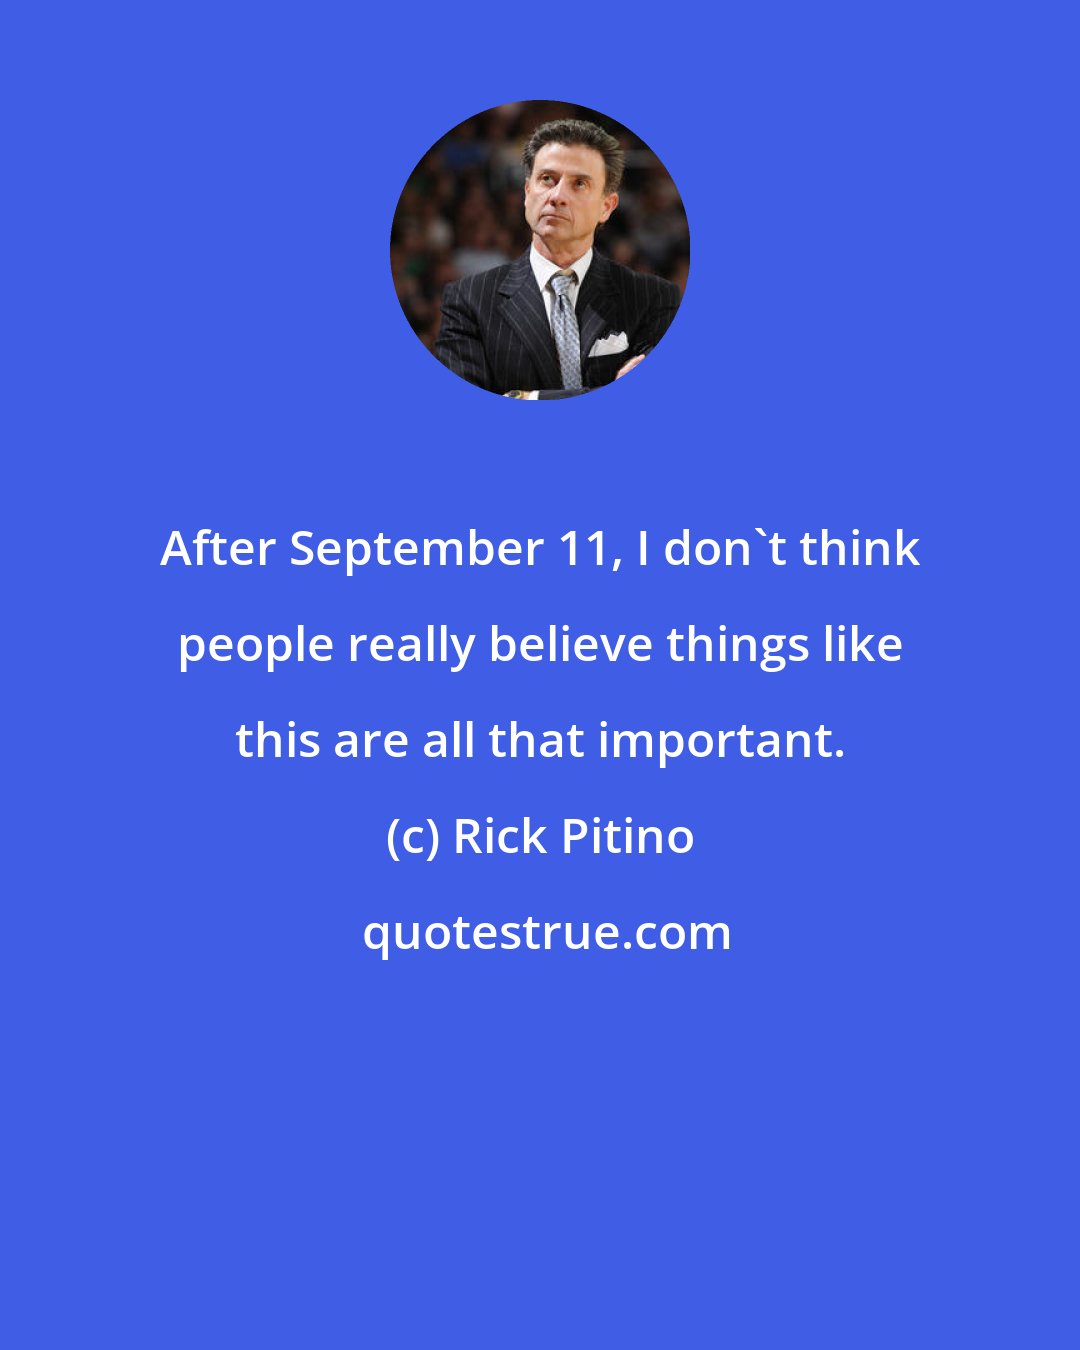 Rick Pitino: After September 11, I don't think people really believe things like this are all that important.